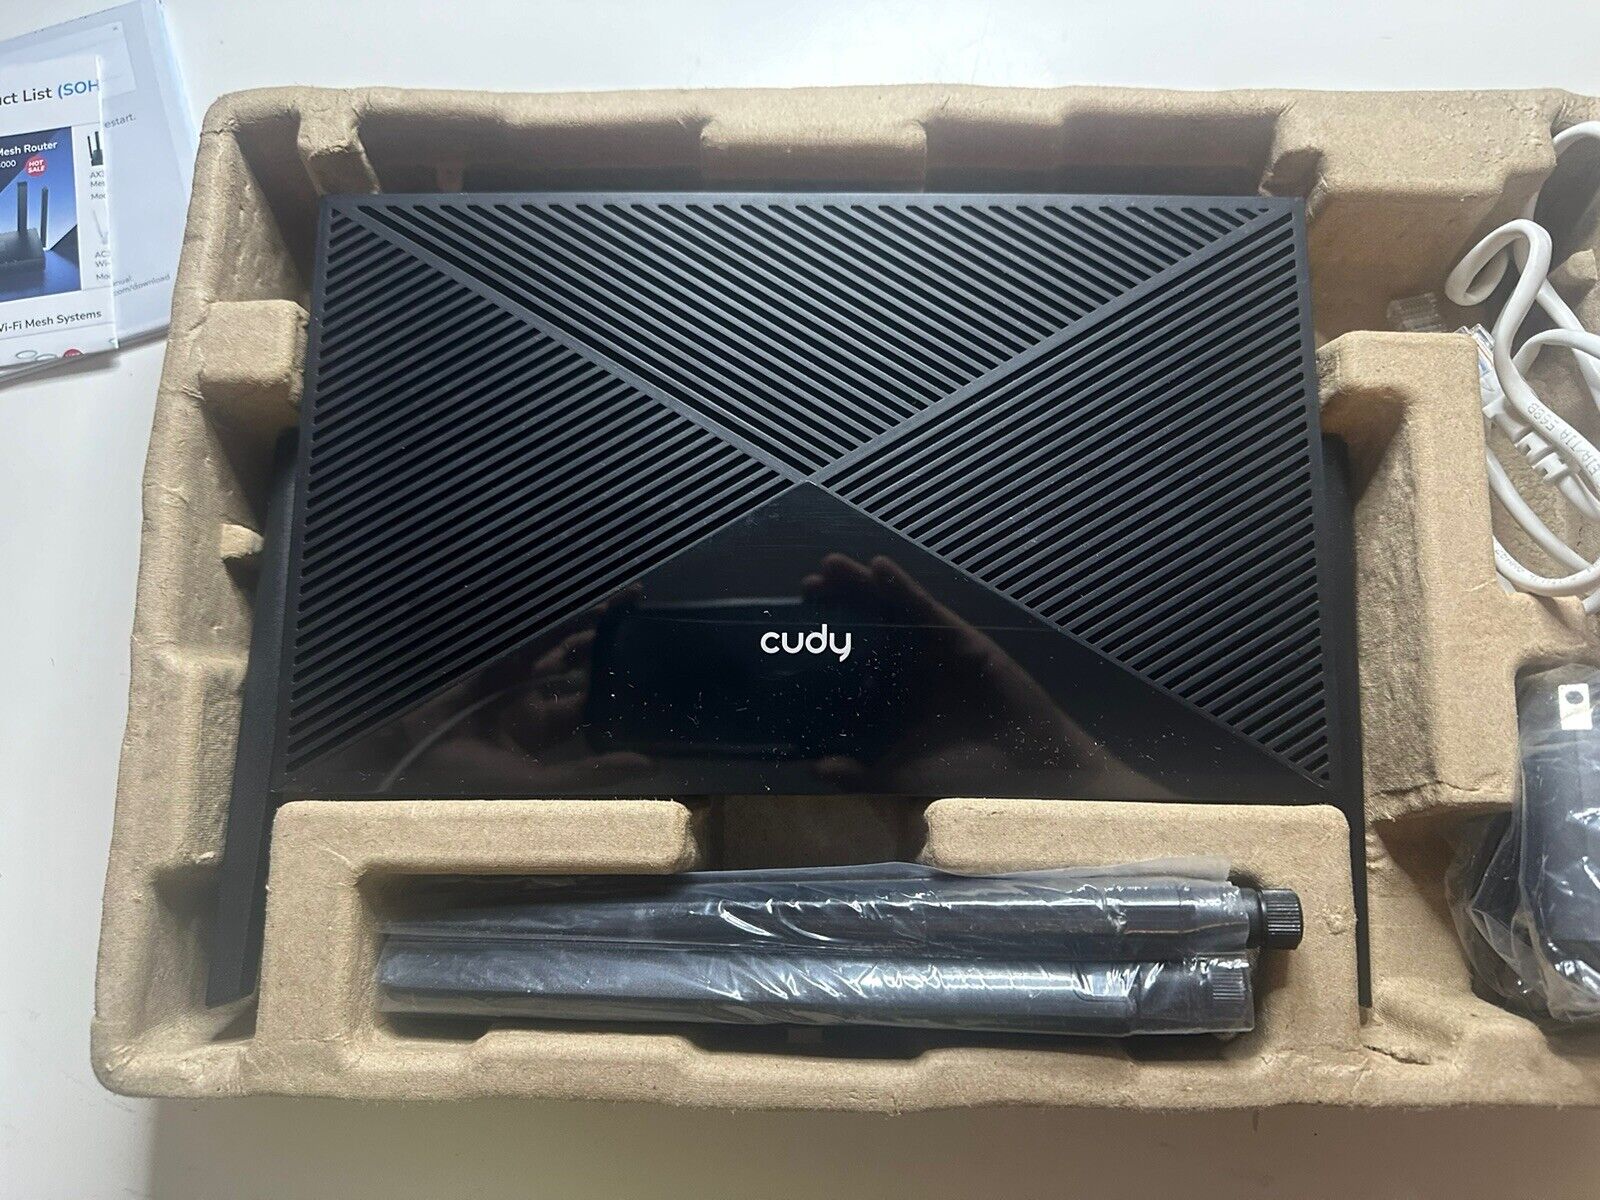 CUDY LT700 4G LTE Cat 6 Wi-Fi Router AC1200 Black (Wi-Fi) - Excellent Condition